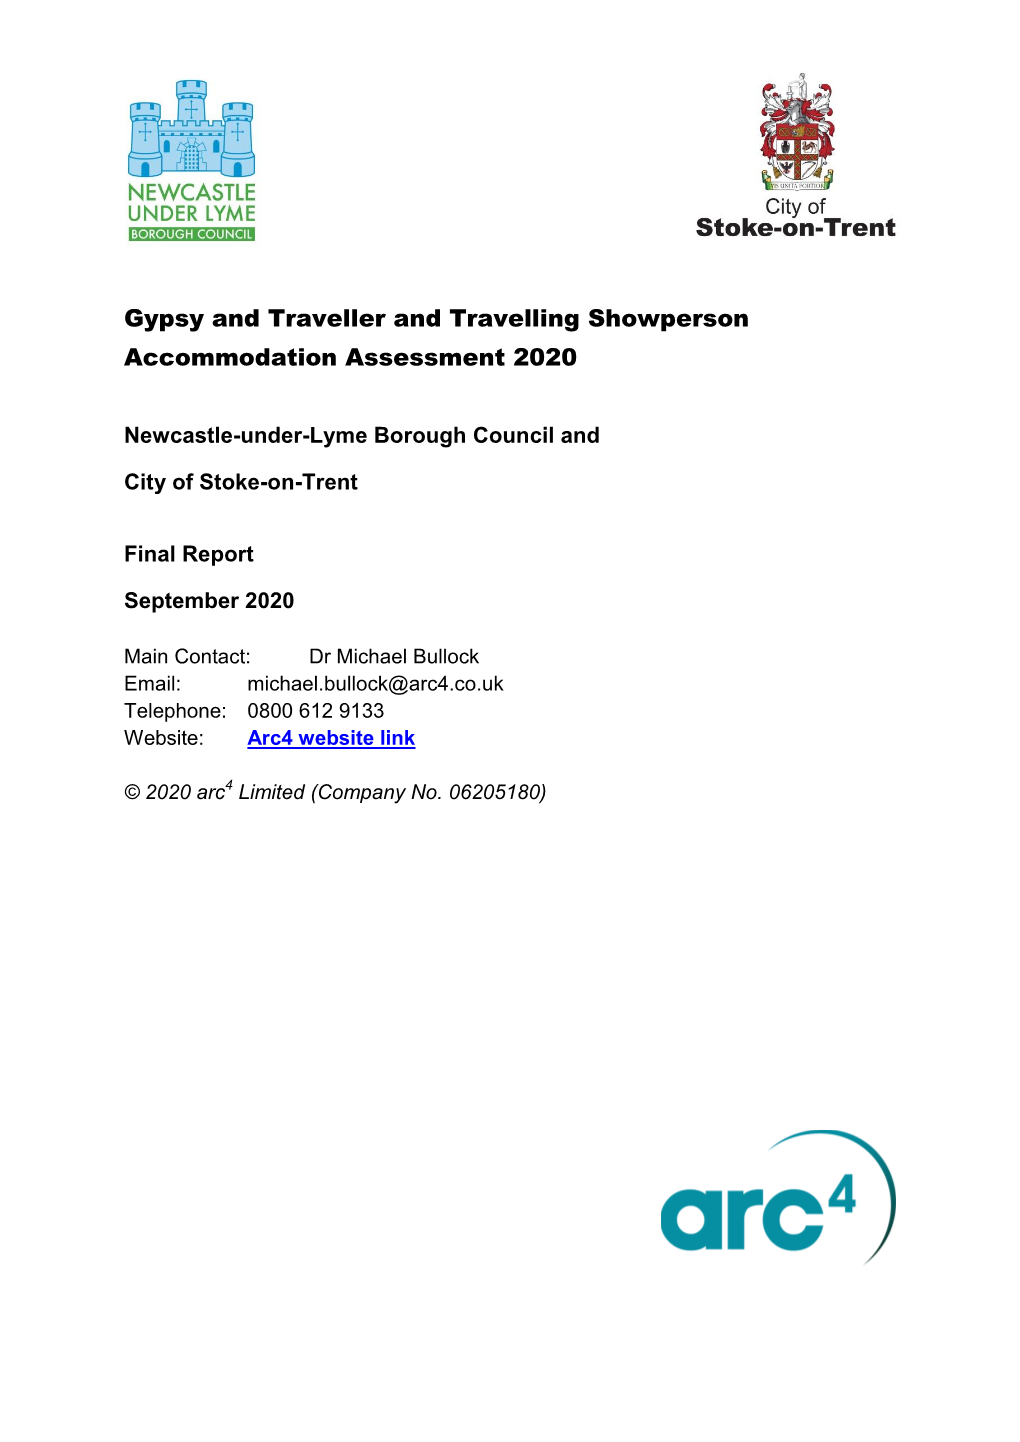 Gypsy and Traveller and Travelling Showperson Accommodation Assessment 2020